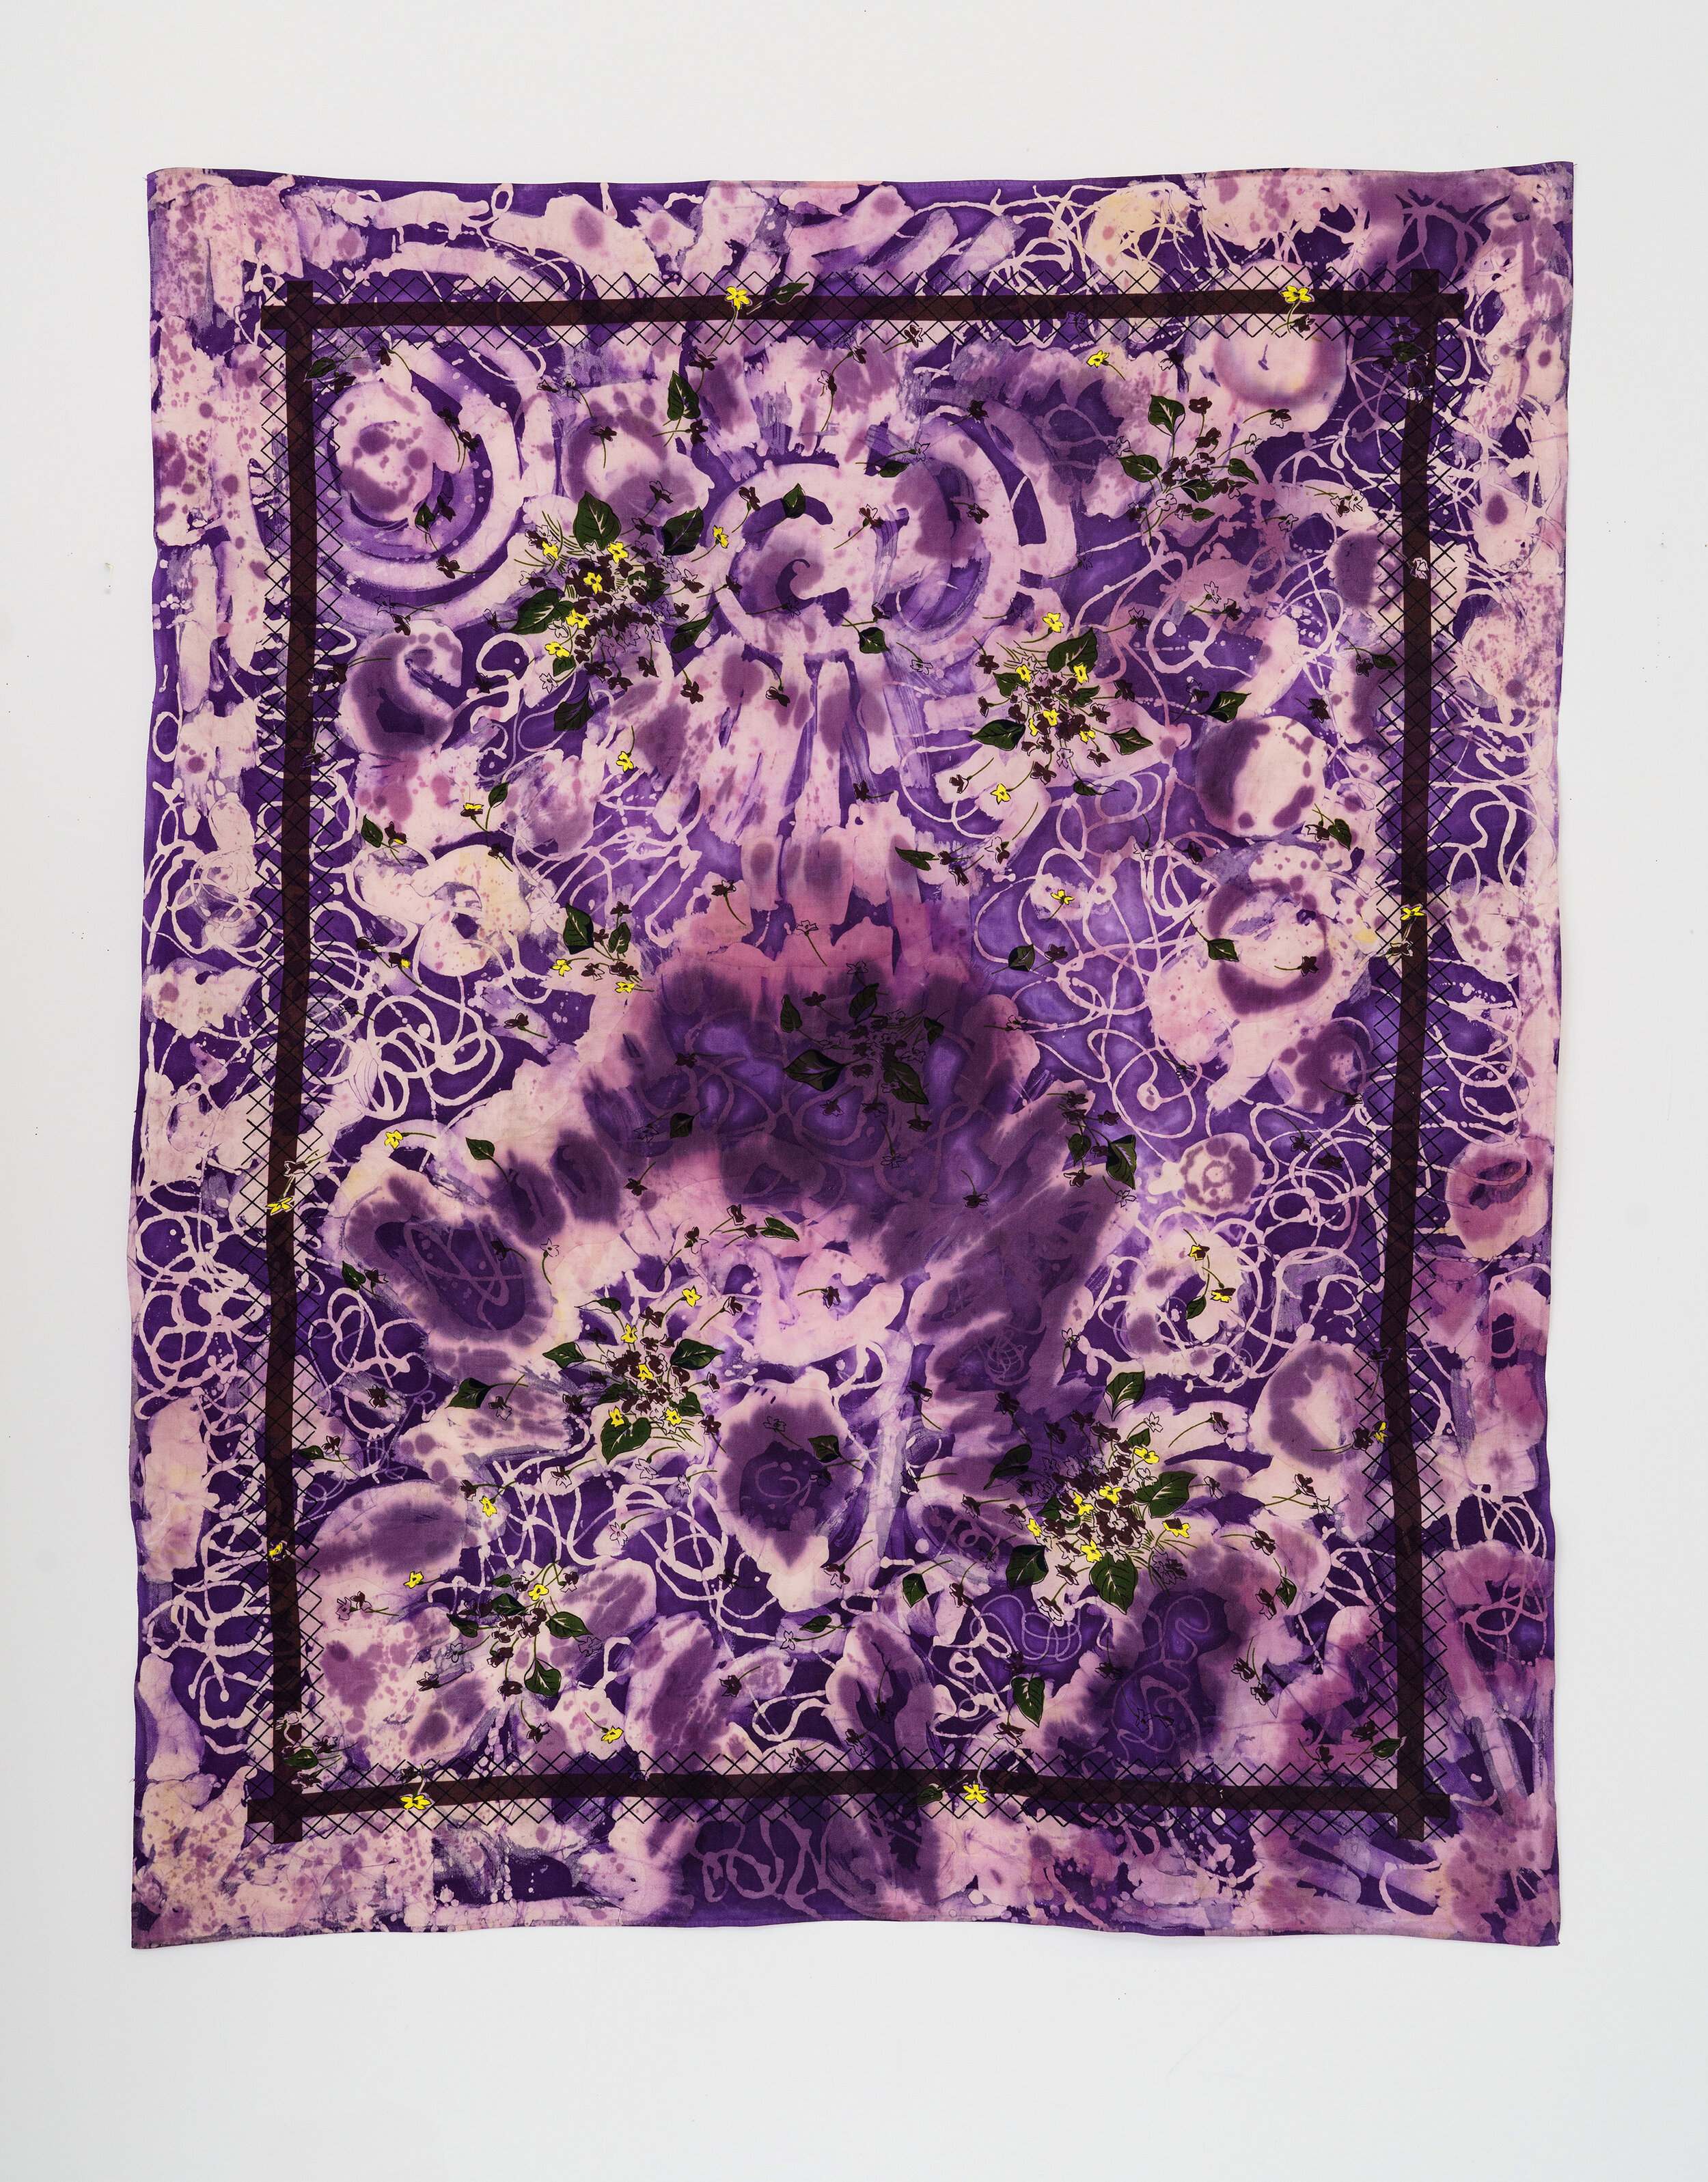 The Violet Tablecloth, 2021